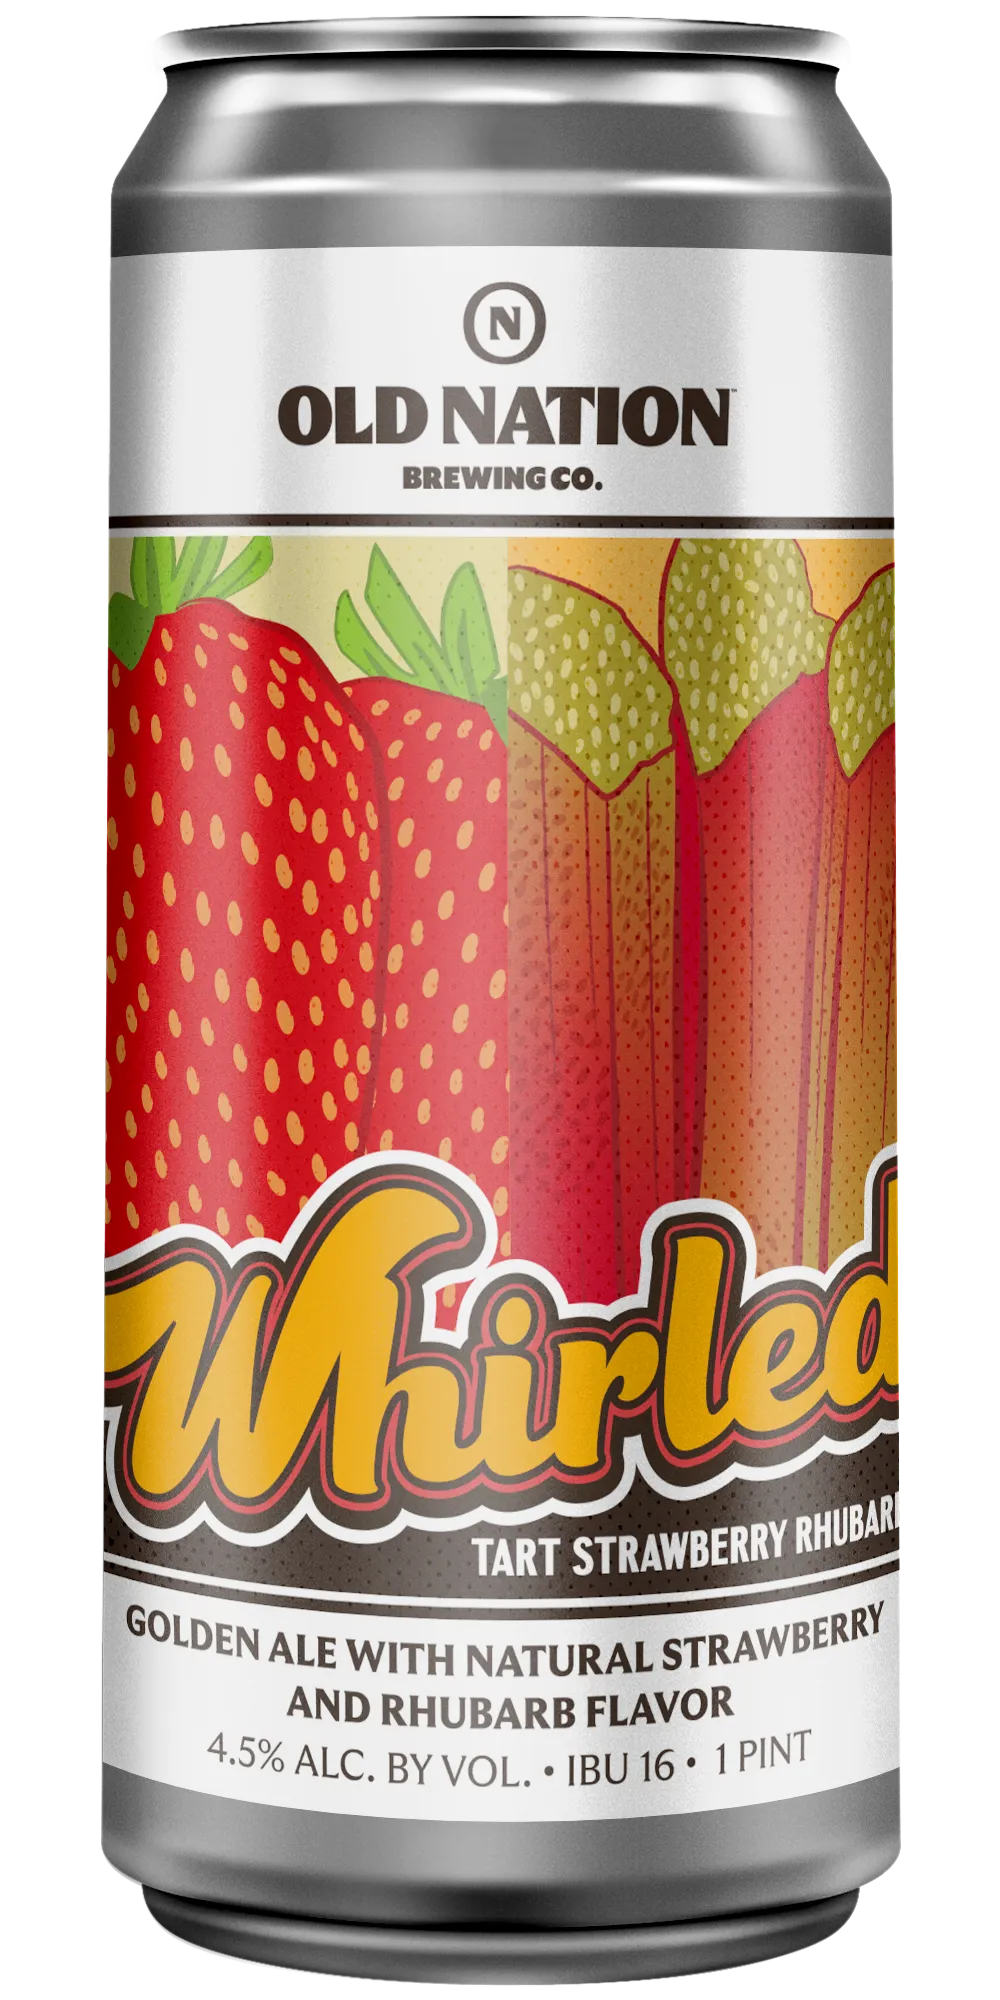 Old Nation Whirled Tart Strawberry Rhubarb beer in an aluminum can. Drawing of strawberries and rhubarb on can label.